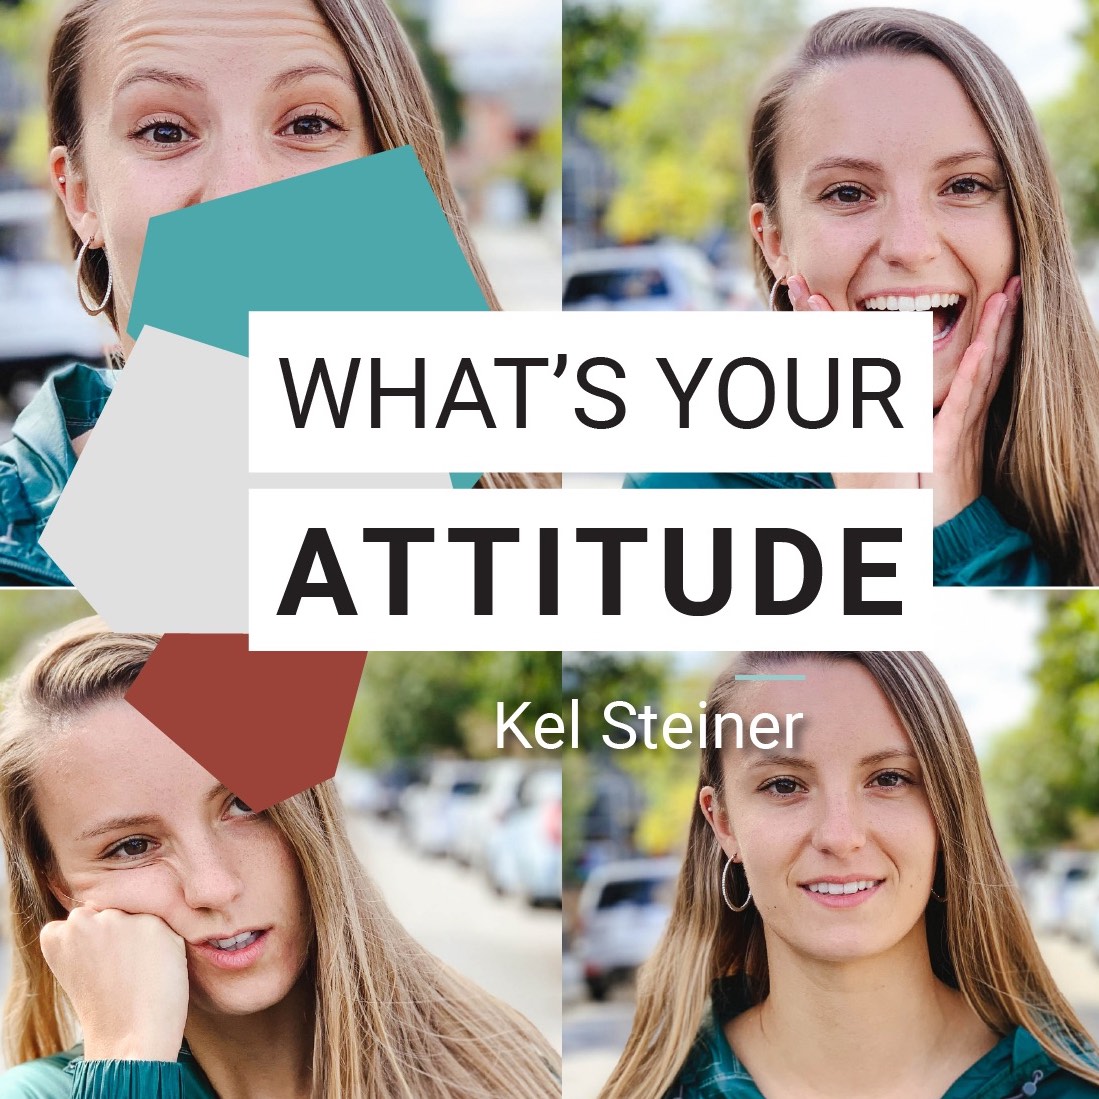 What's Your Attitude - Kel Steiner // Friday Night Meeting